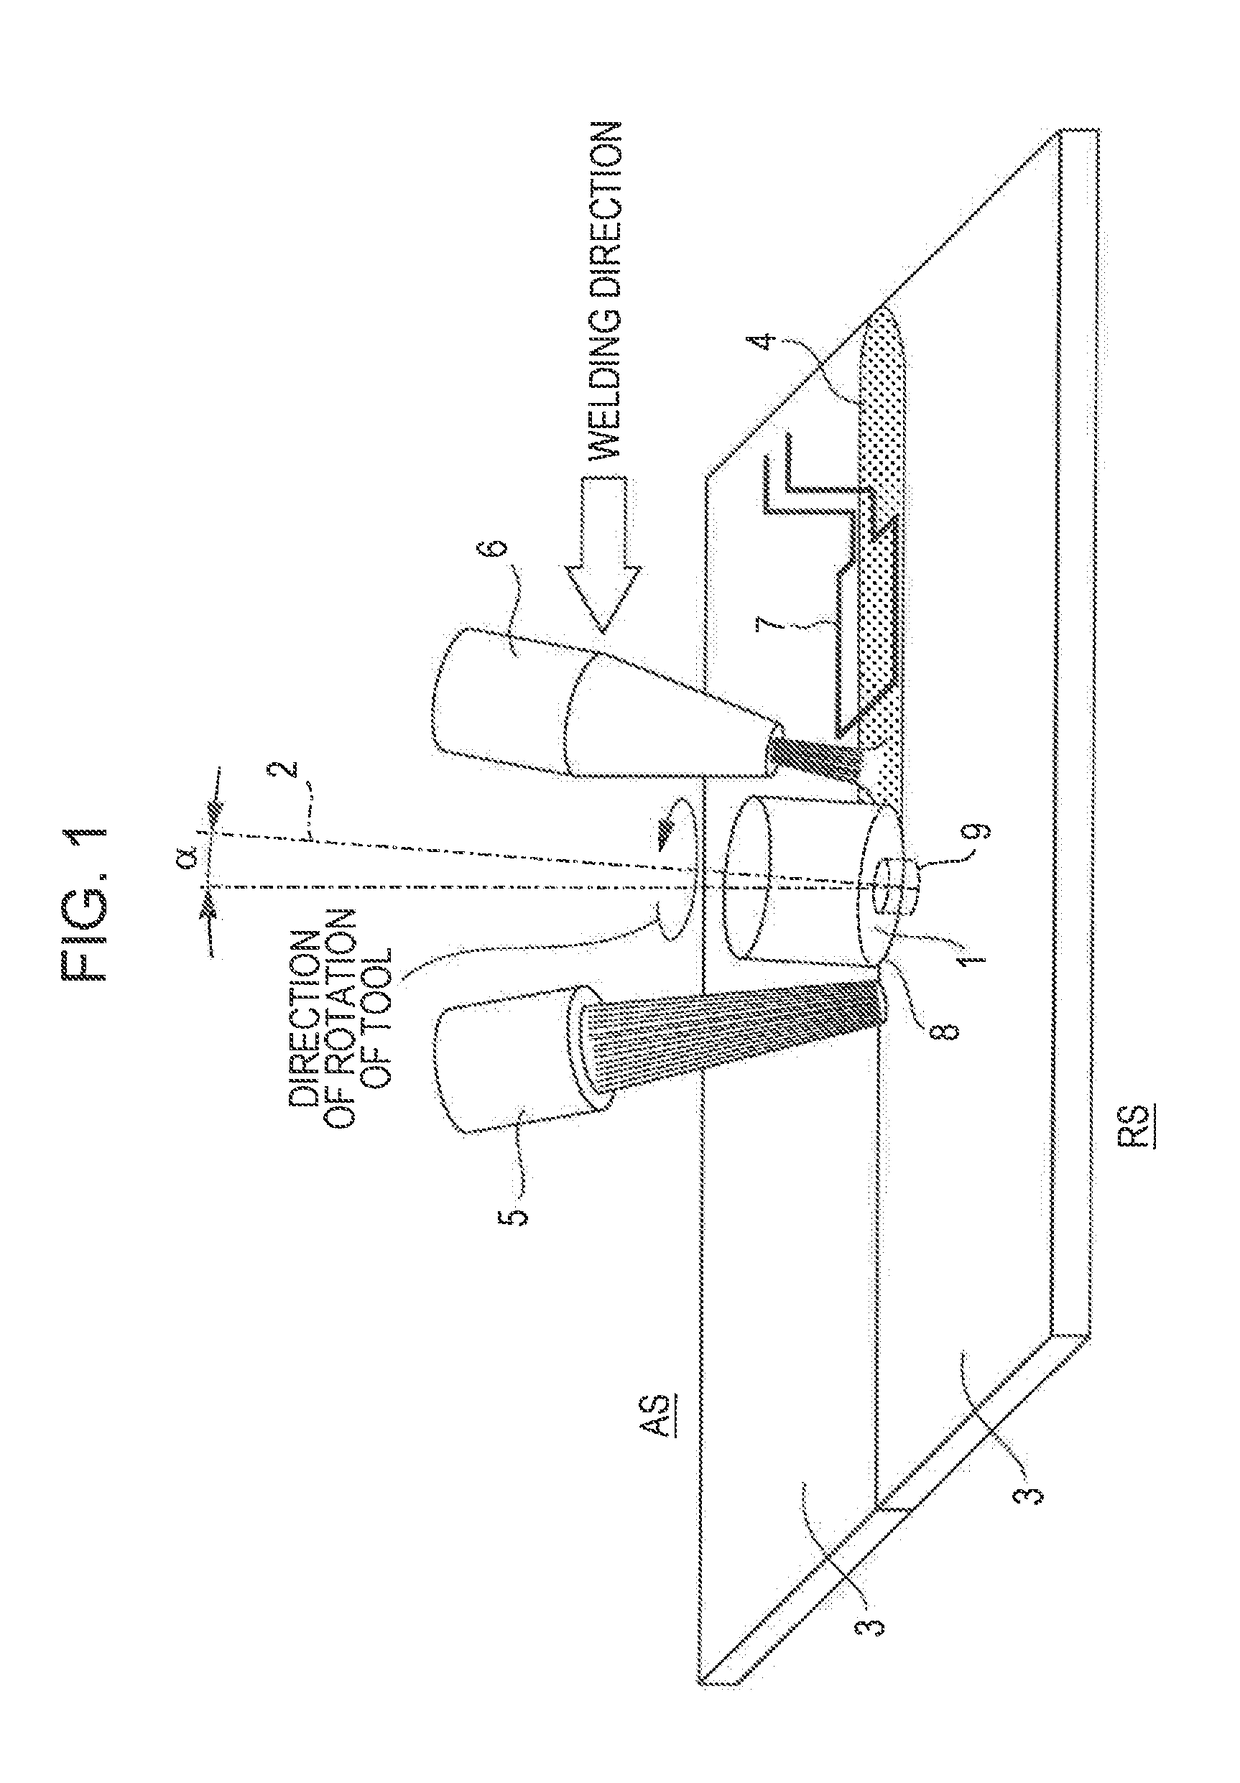 Friction stir welding apparatus for structural steel